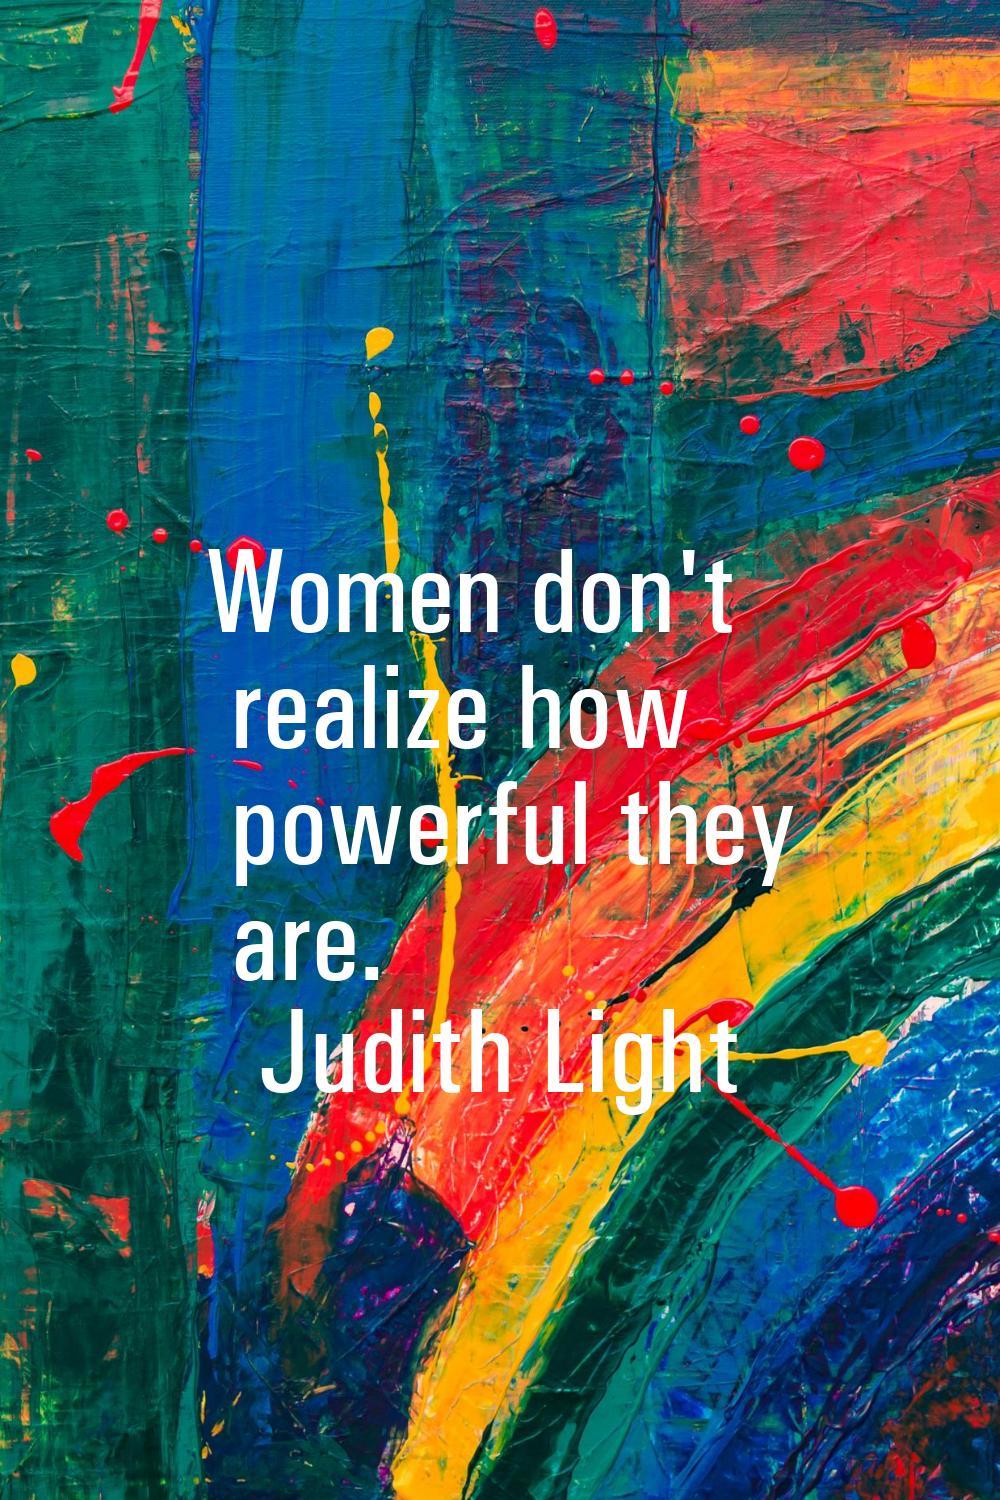 Women don't realize how powerful they are.